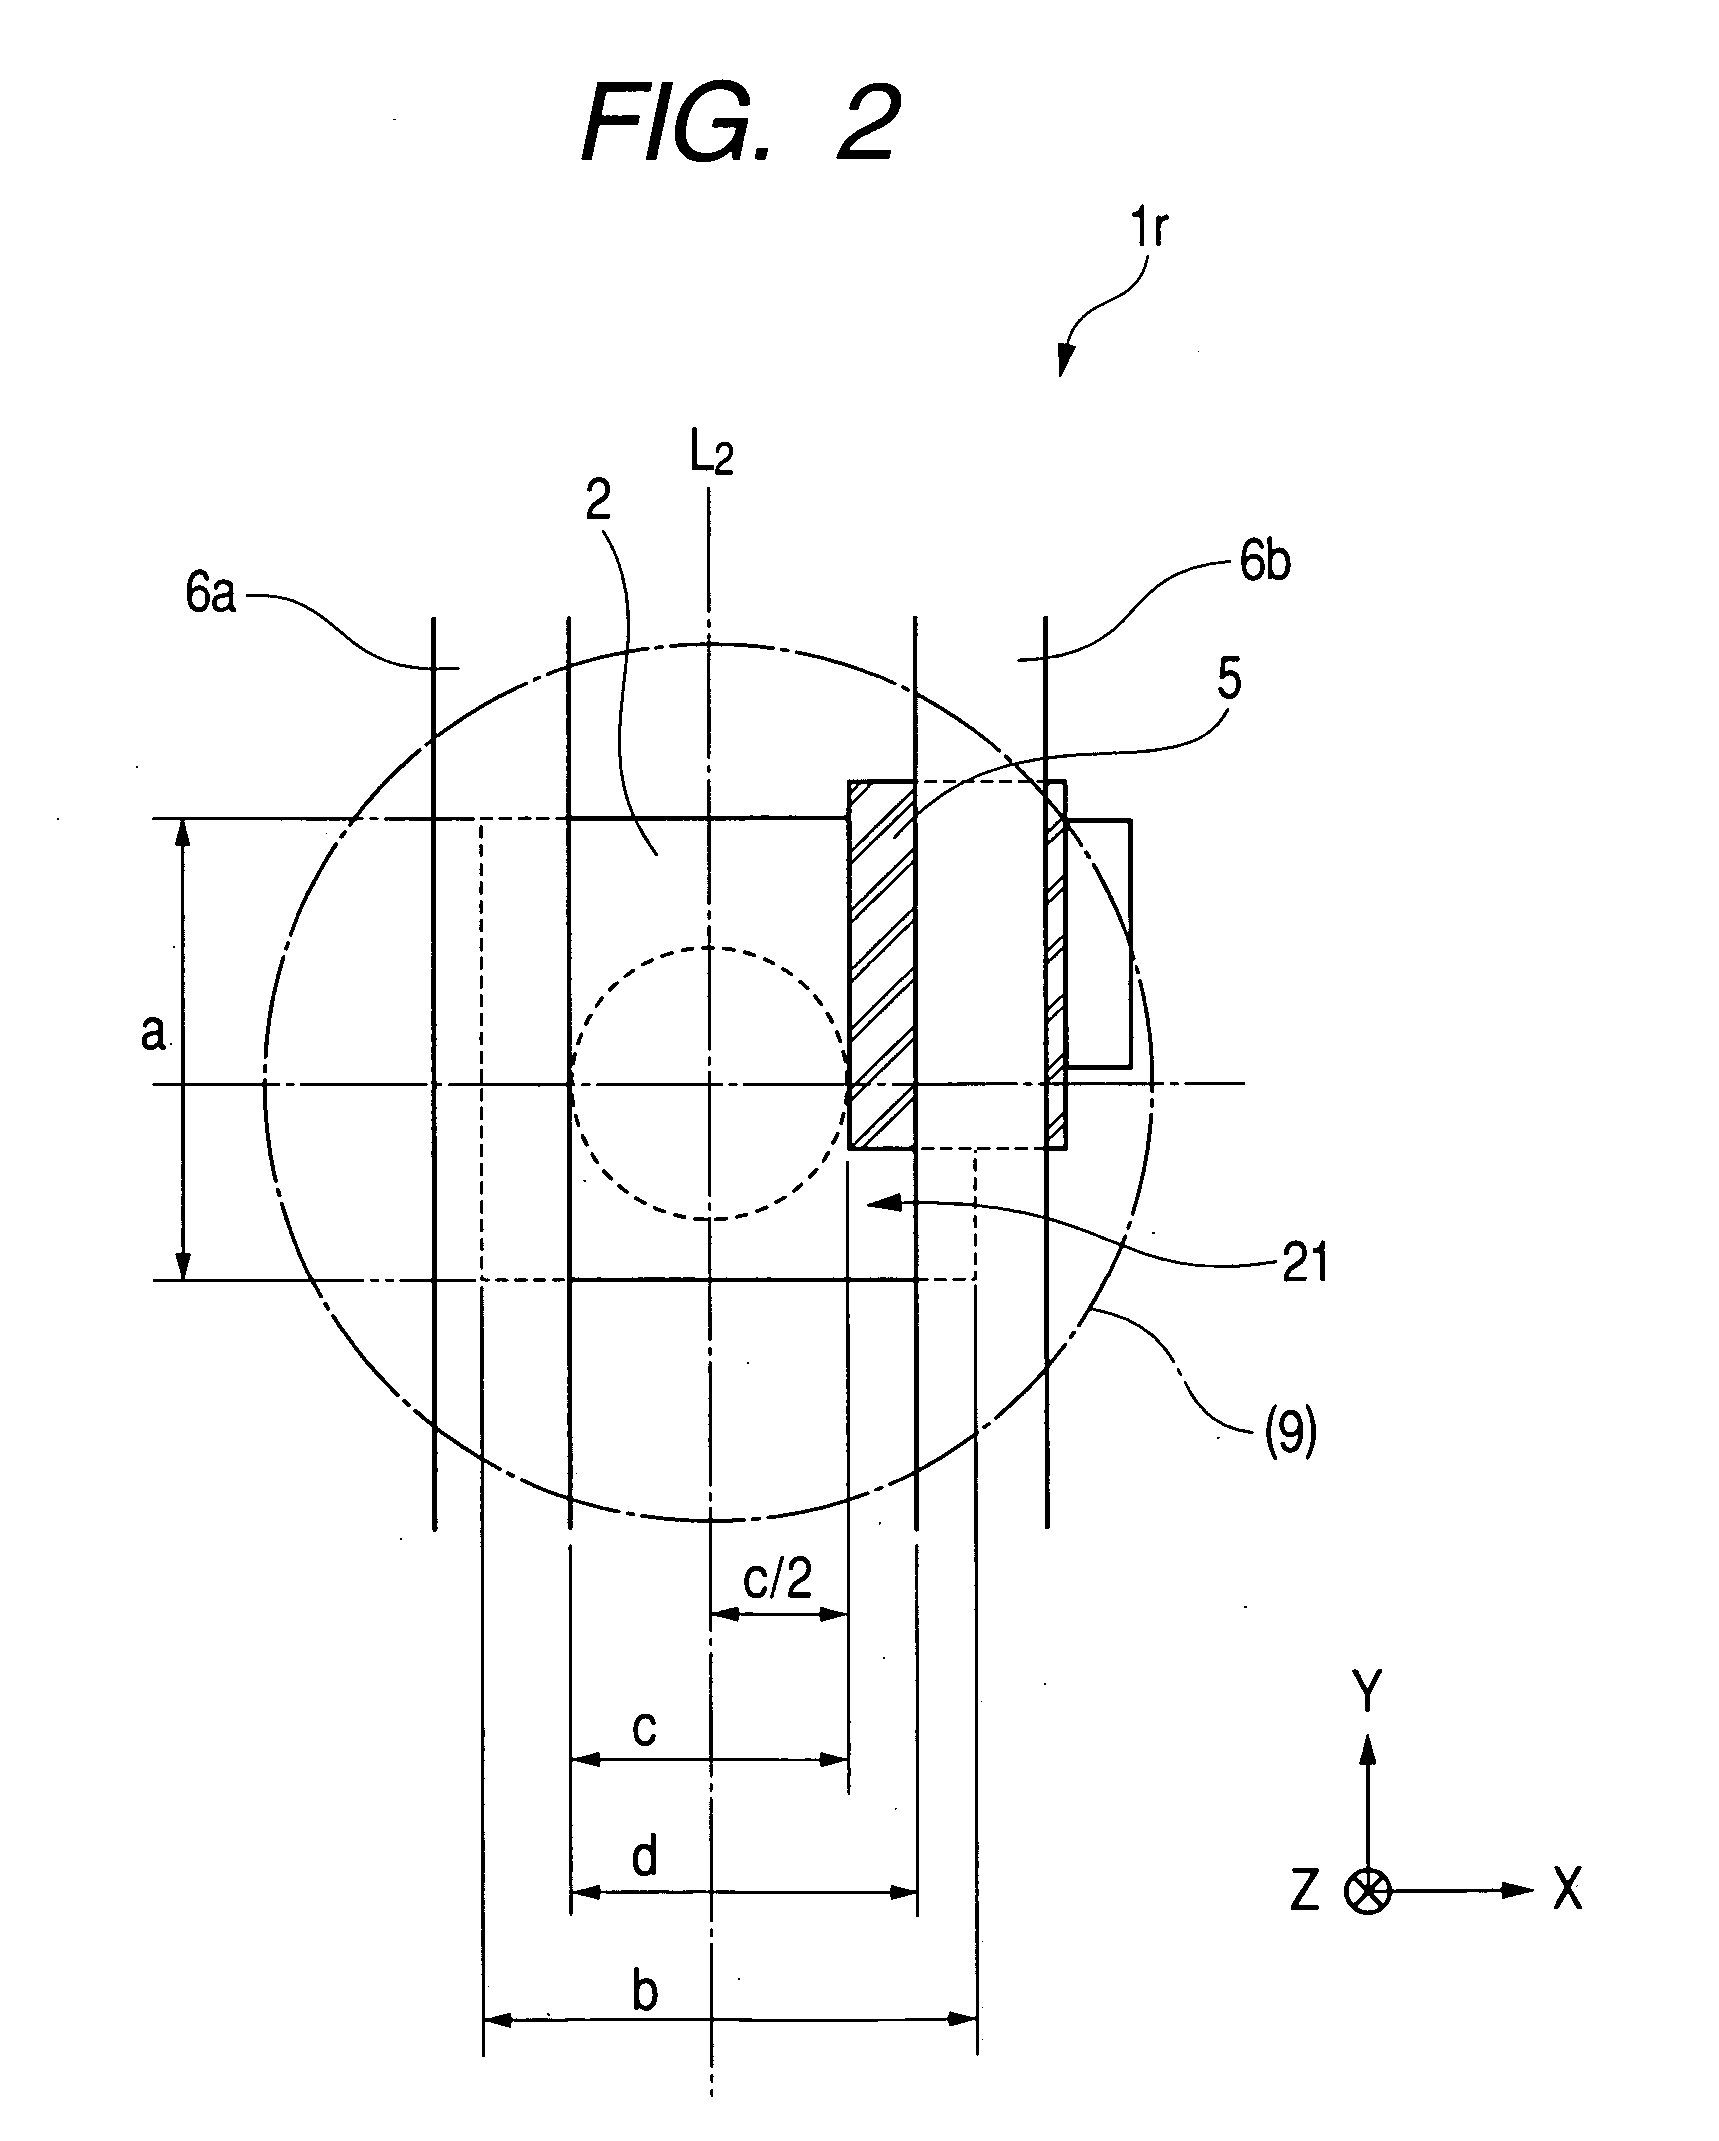 Image pick-up device and image pick-up system using the image pick-up device